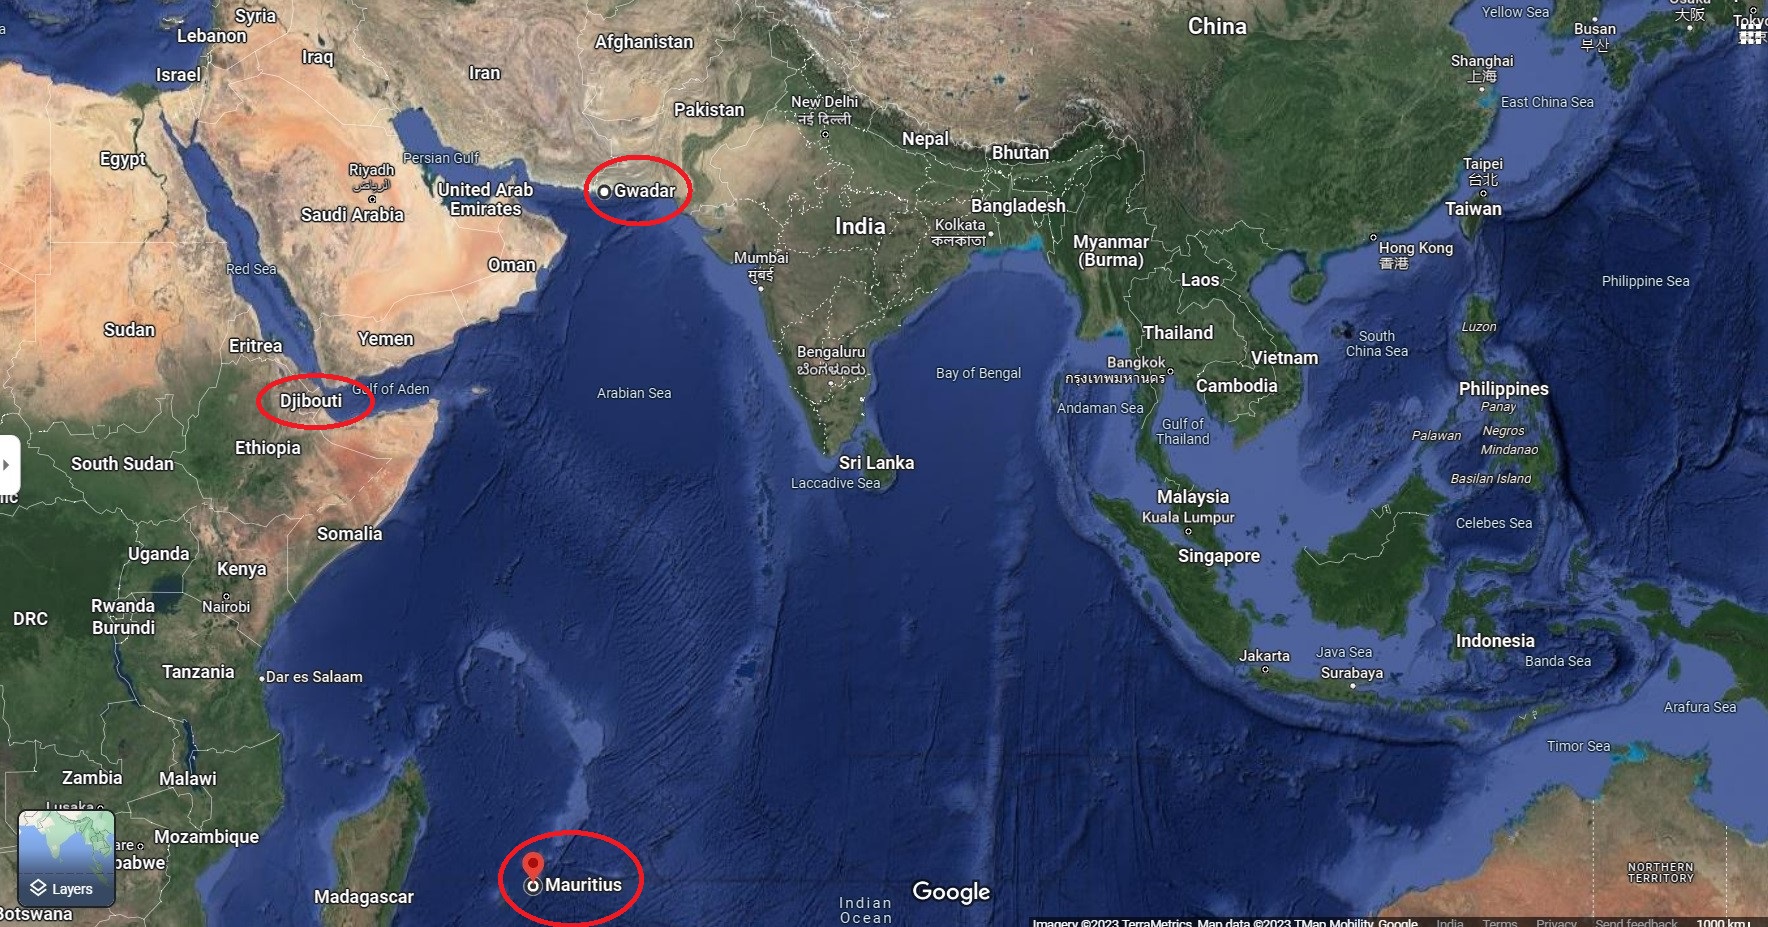 India, U.S. On Radar As China Plans To Control Arabian Sea From 3 Naval Bases